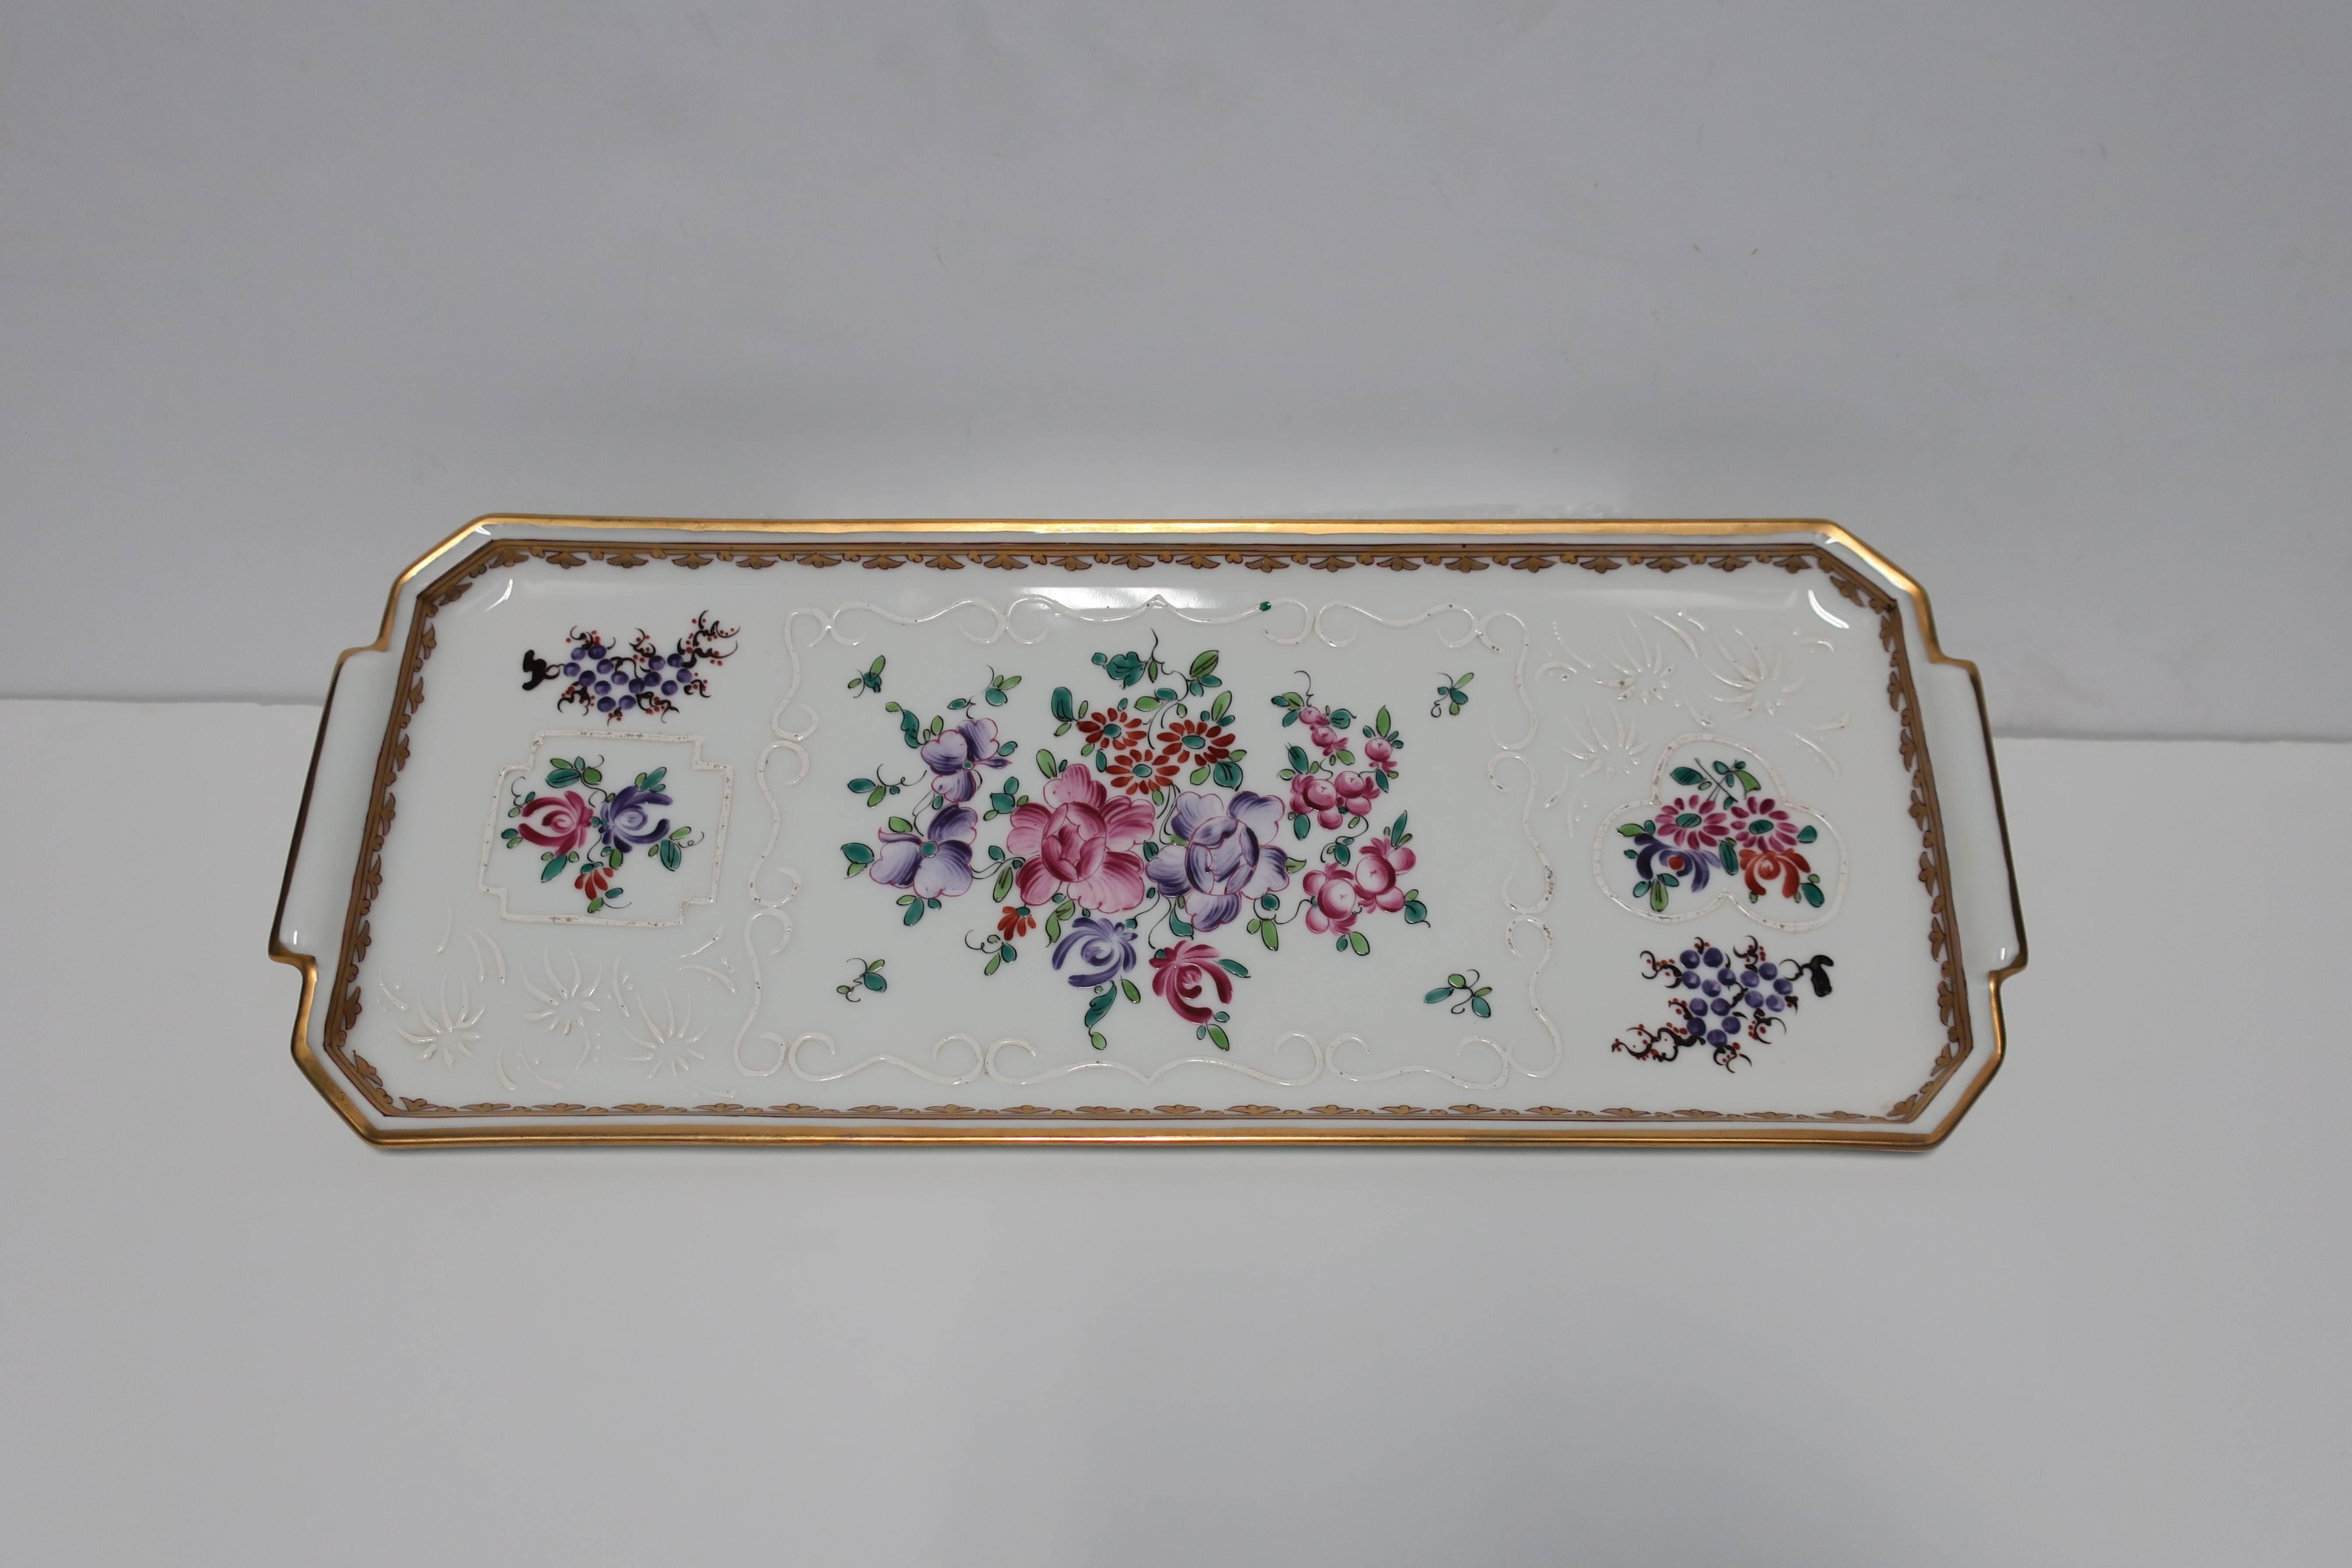 A beautiful vintage French hand-painted porcelain rectangular tray or serving piece with floral motif and gold trim. With marker's mark on bottom as shown in image #8; Paris, France.

Tray measures: 5